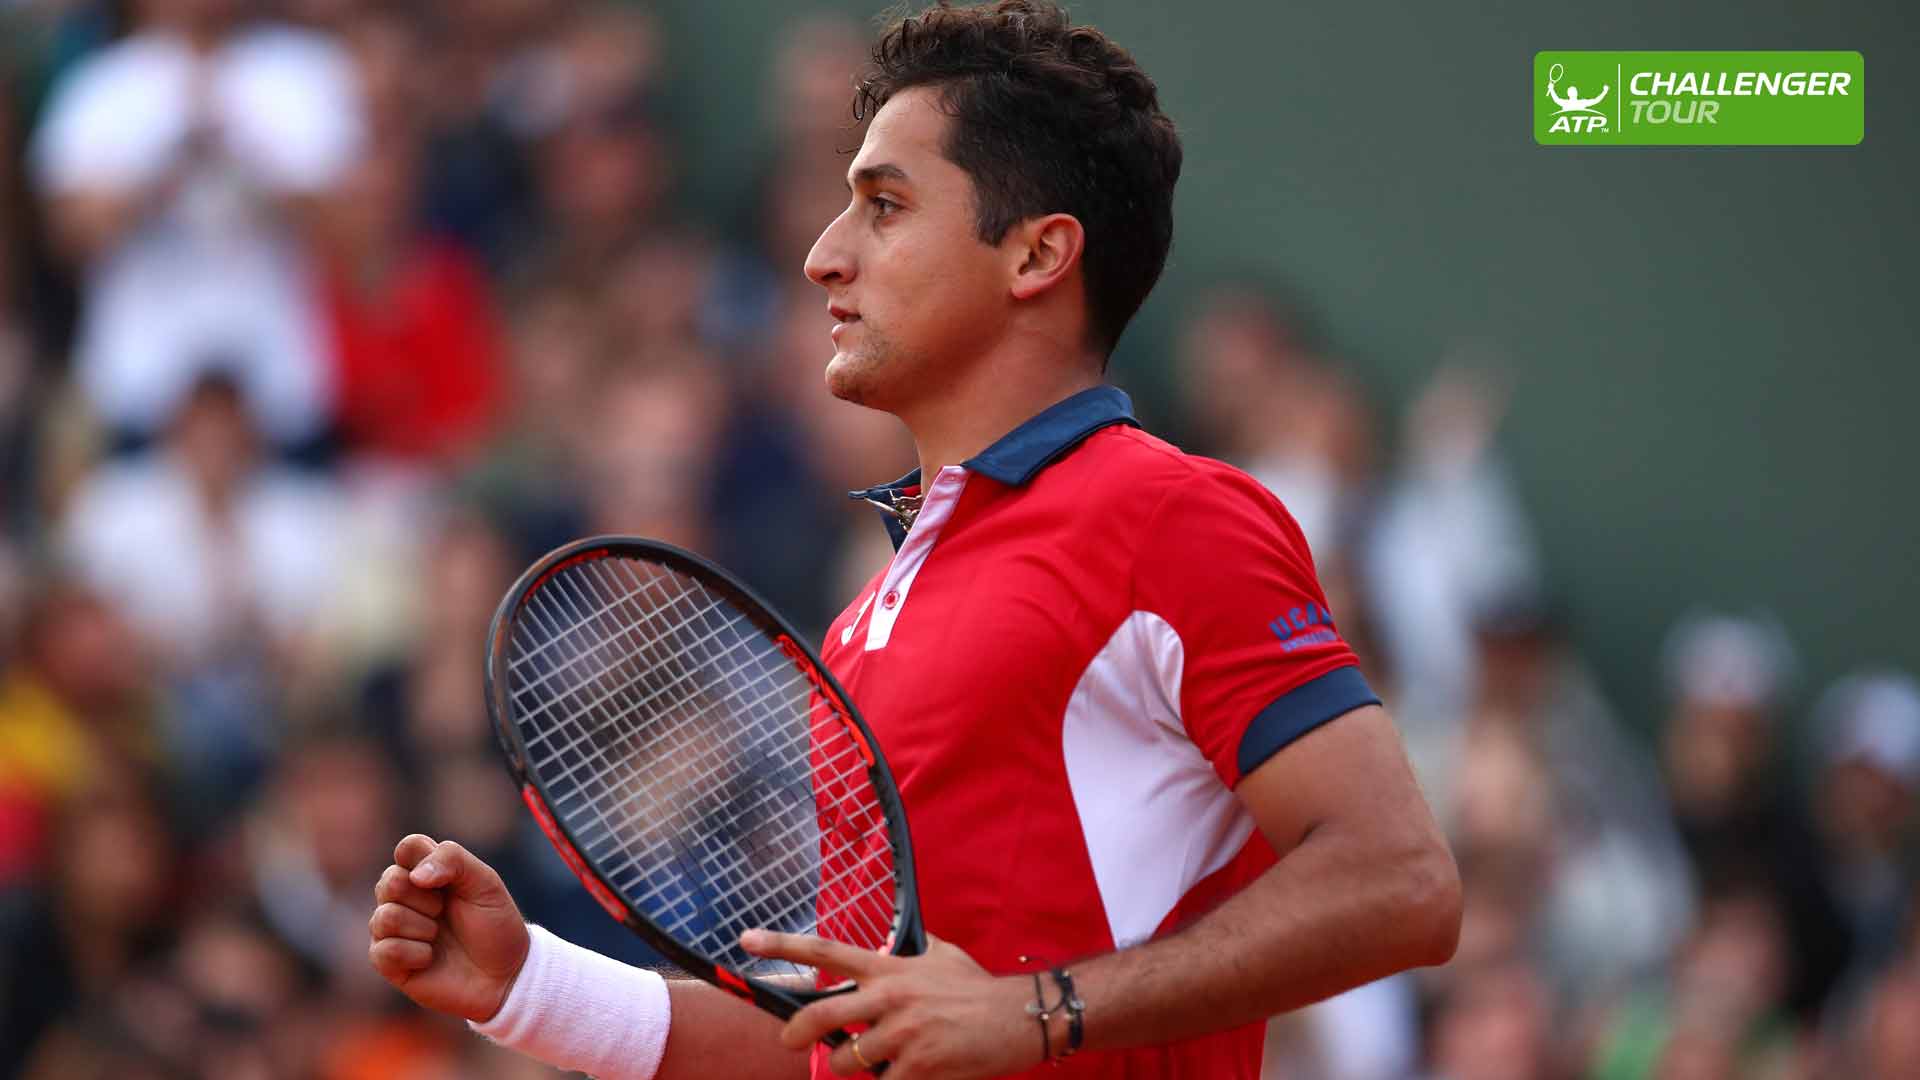 Nicolas Almagro enjoys another strong result on clay at the ATP Challenger Tour event in Genova.